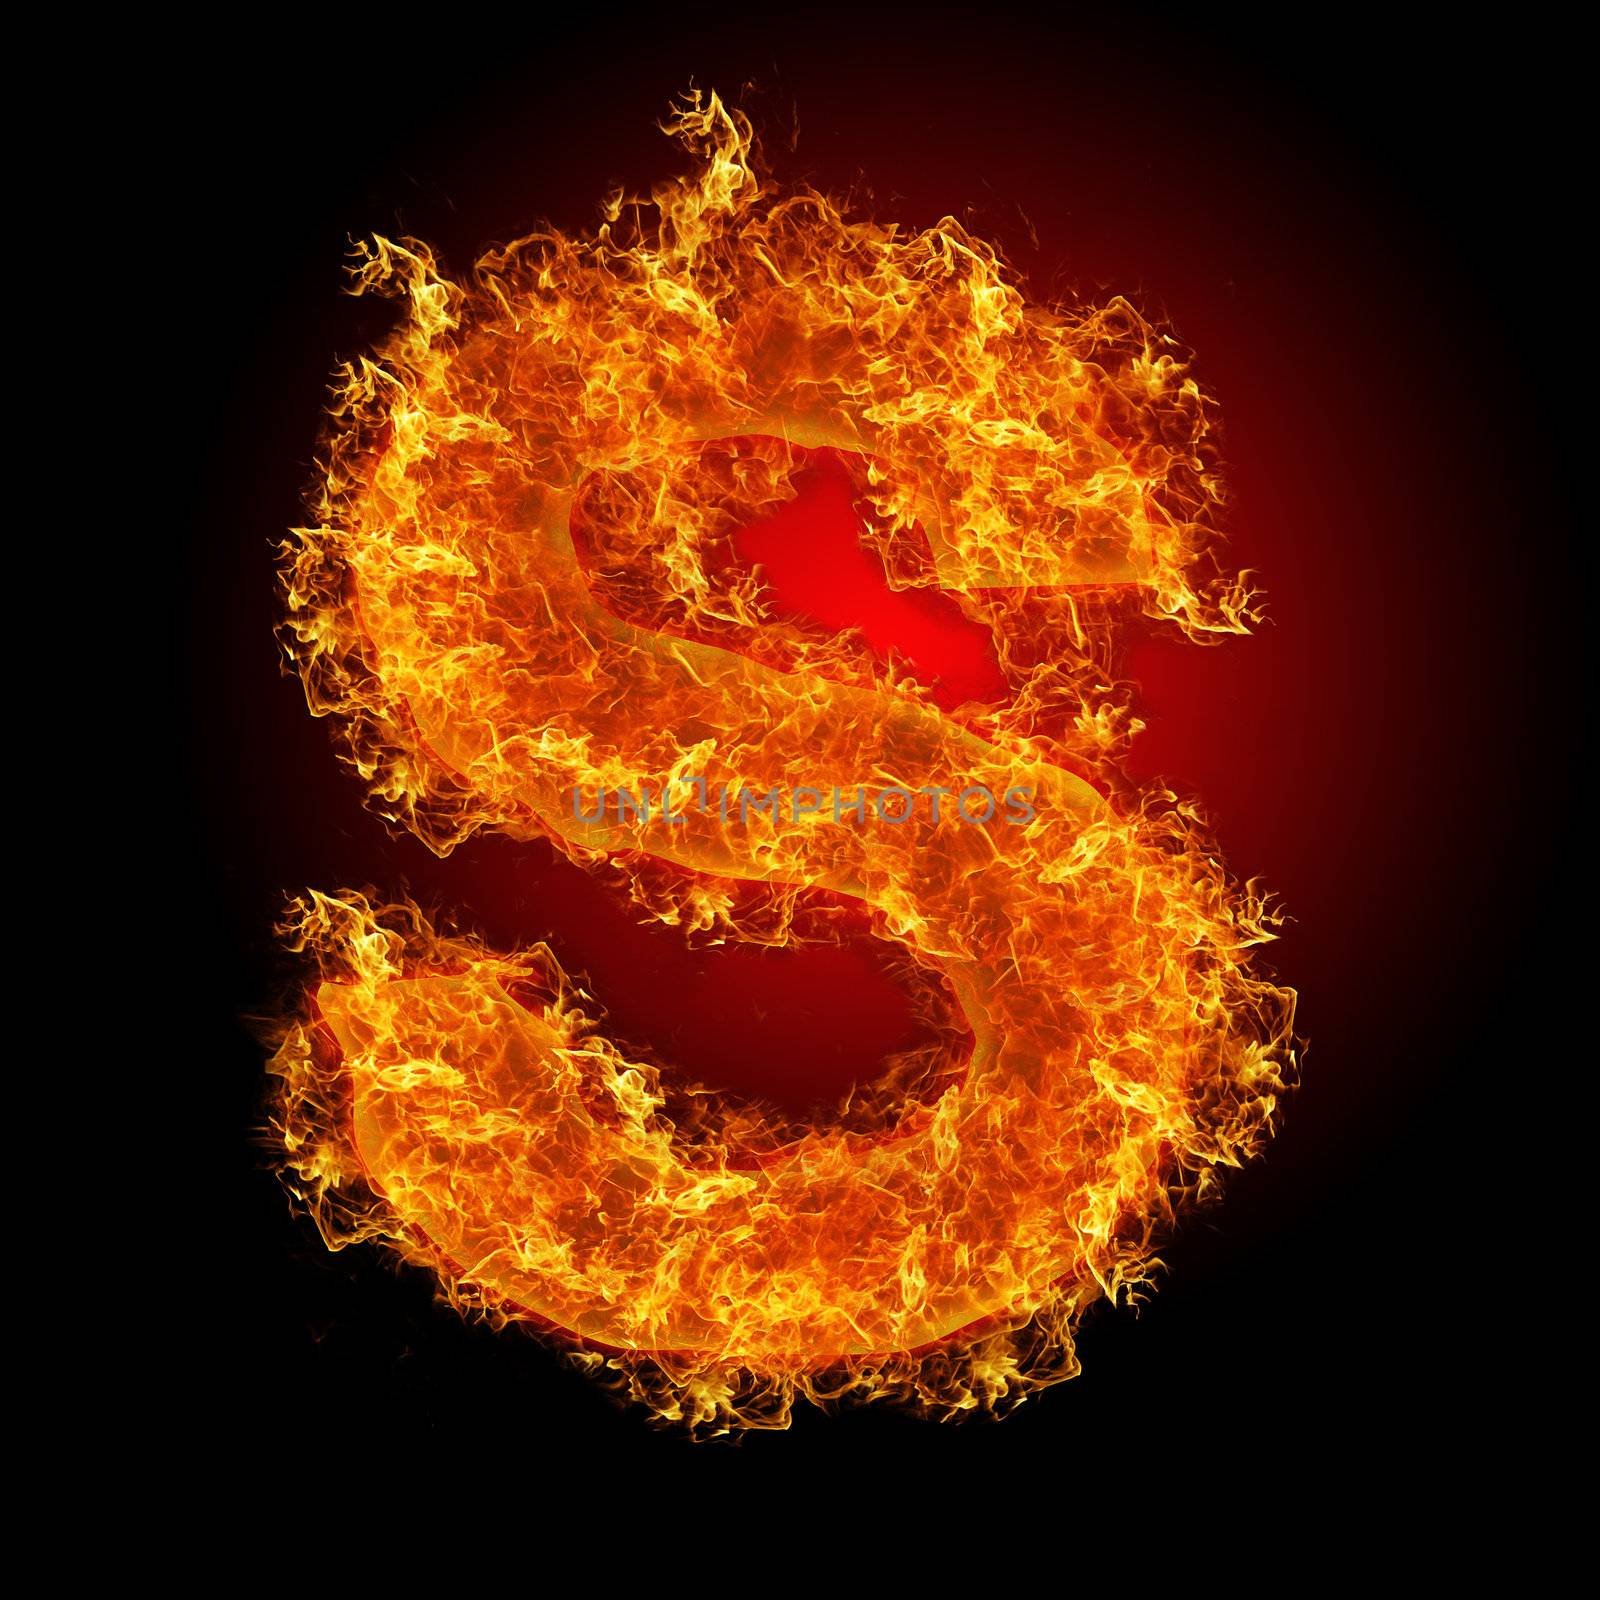 Fire letter S by rusak